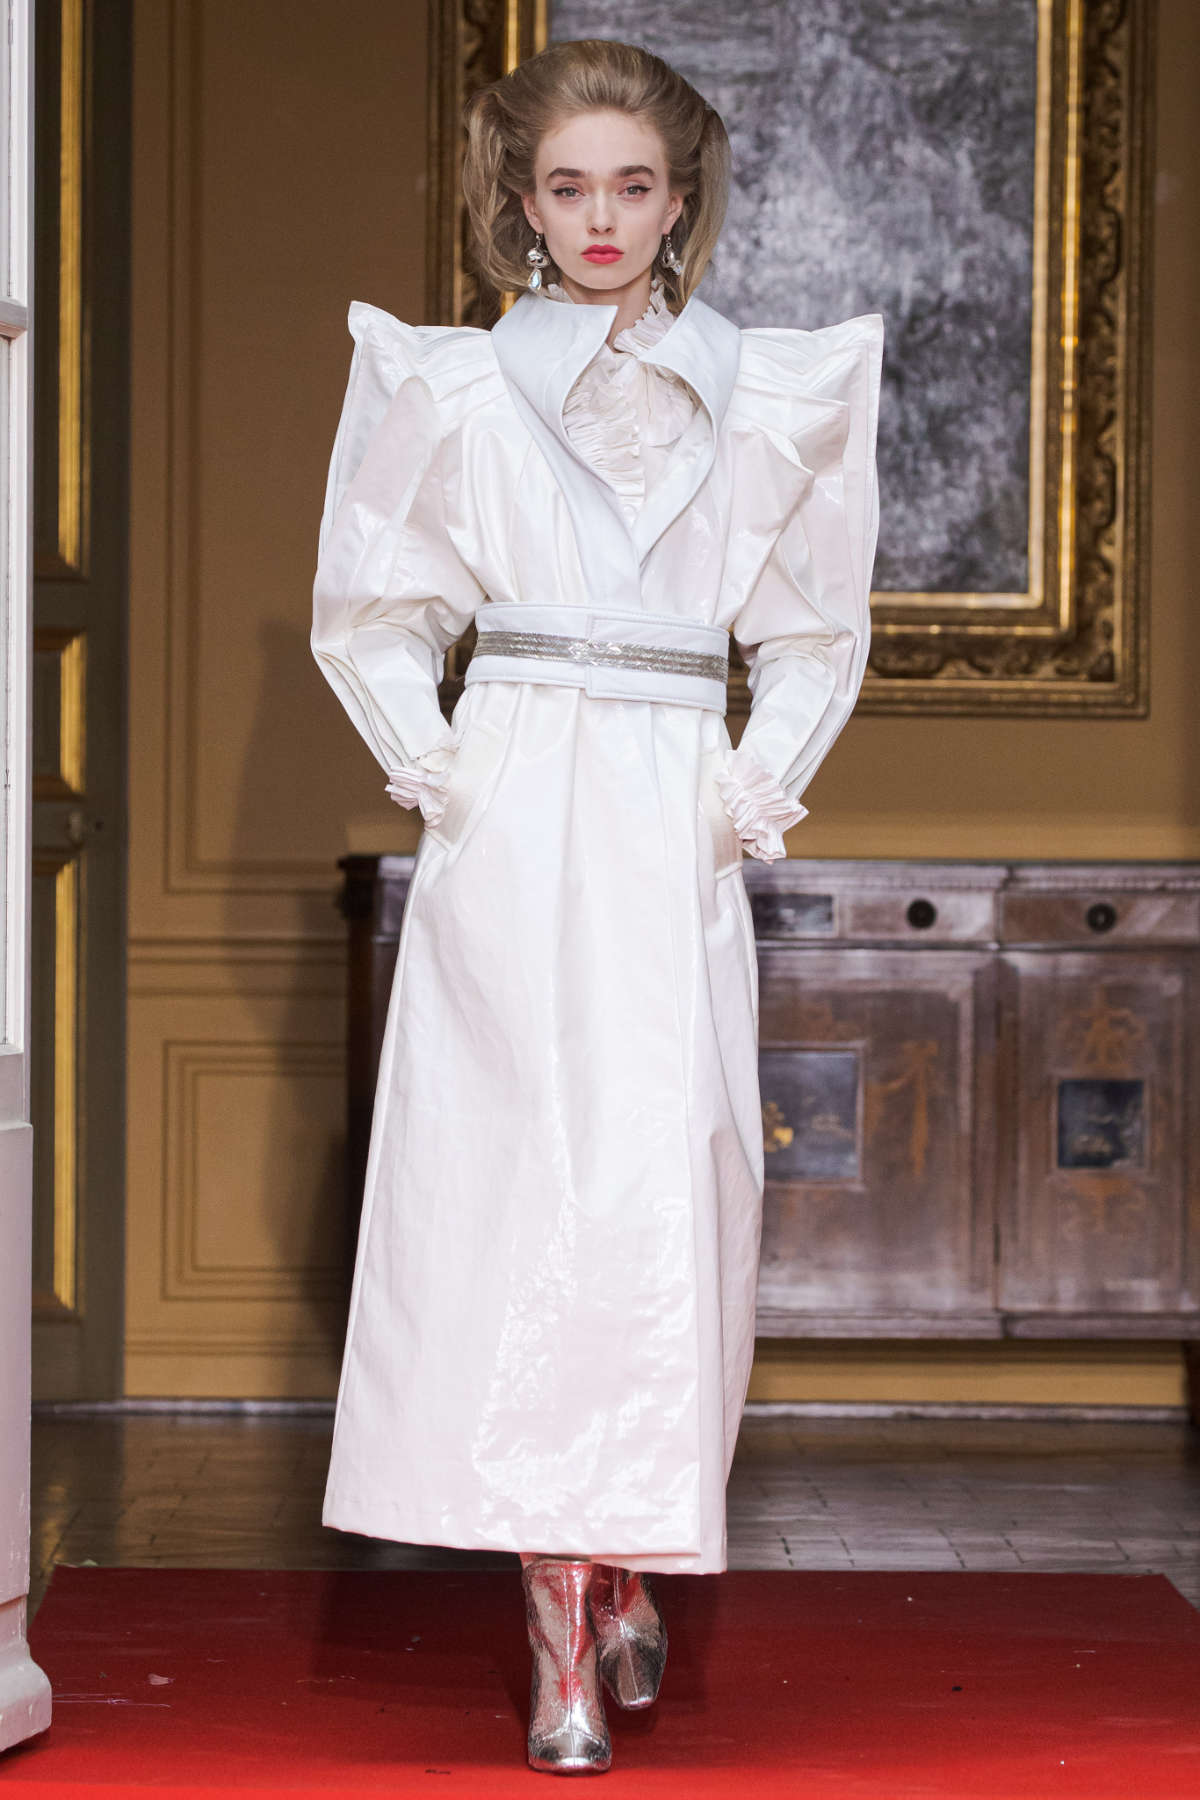 Ronald Van Der Kemp Presents Its New Haute Couture Fall 2022 Collection